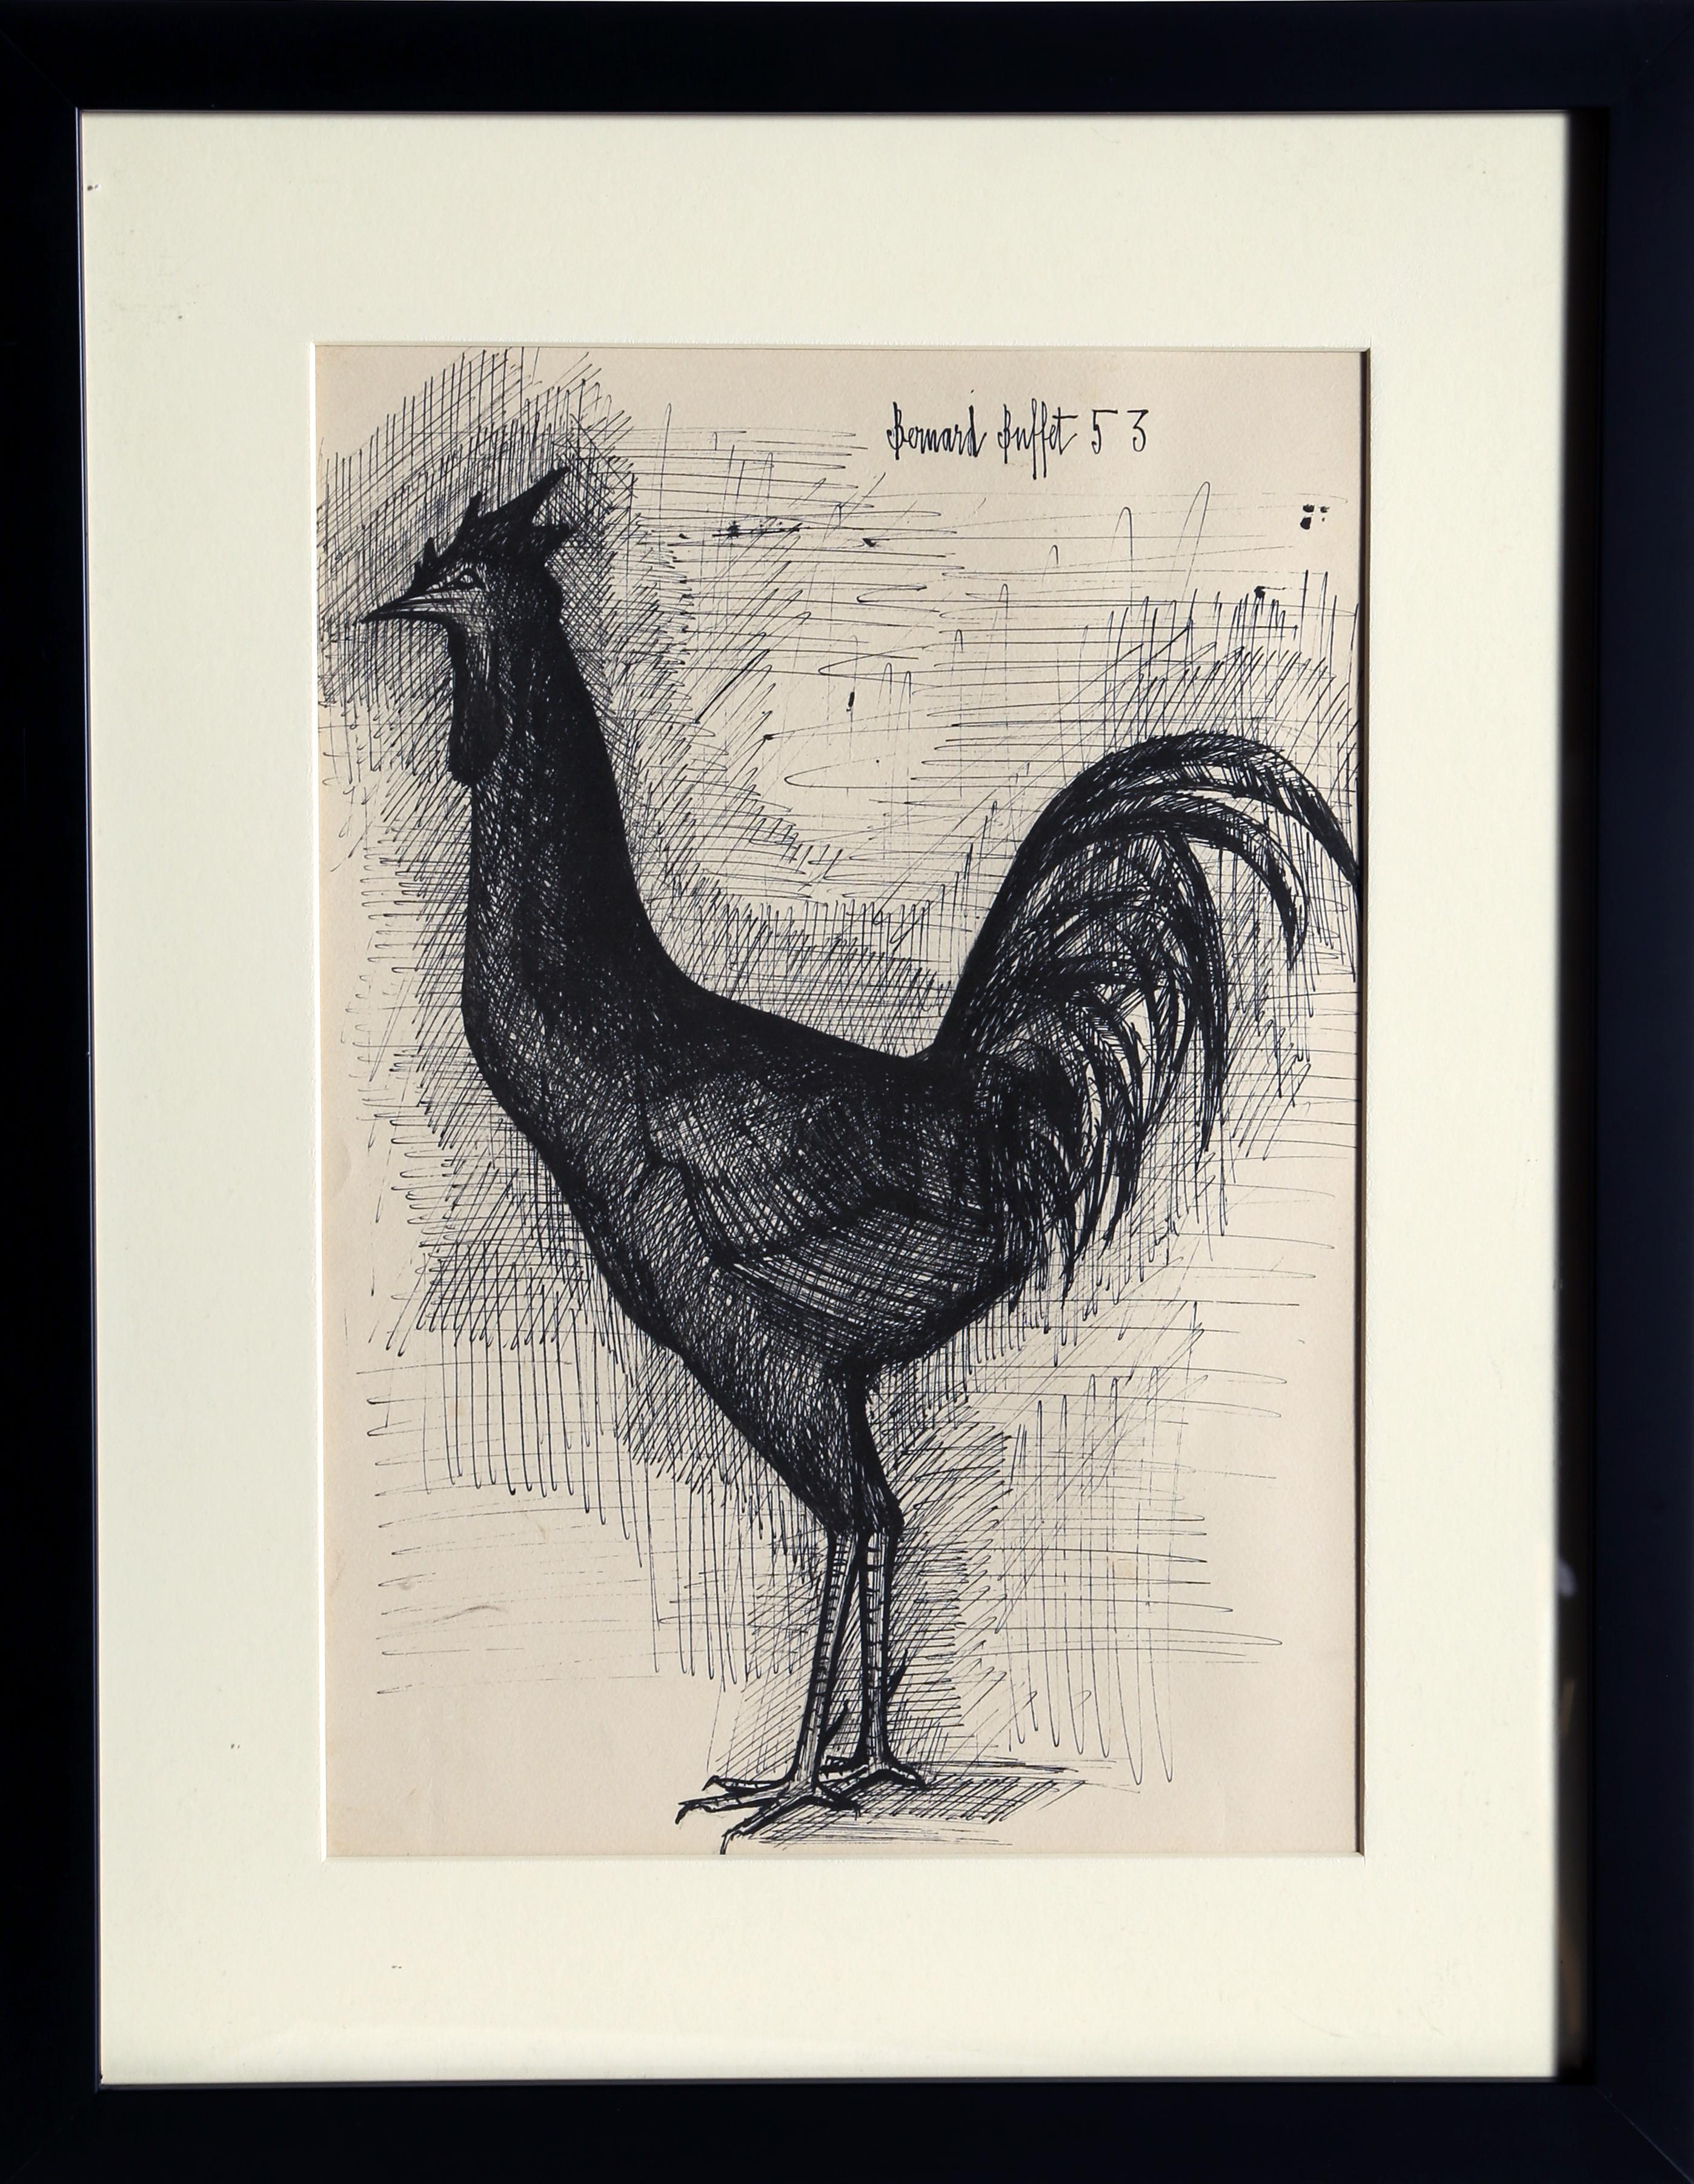 Artist: Bernard Buffet, French (1928 - 1999)
Title: Rooster
Year: 1953
Medium: Lithograph mounted on Board, signed in the plate
Image Size: 15 x 10 in. (50.8 x 36.83 cm)
Frame: 22 x 17 inches